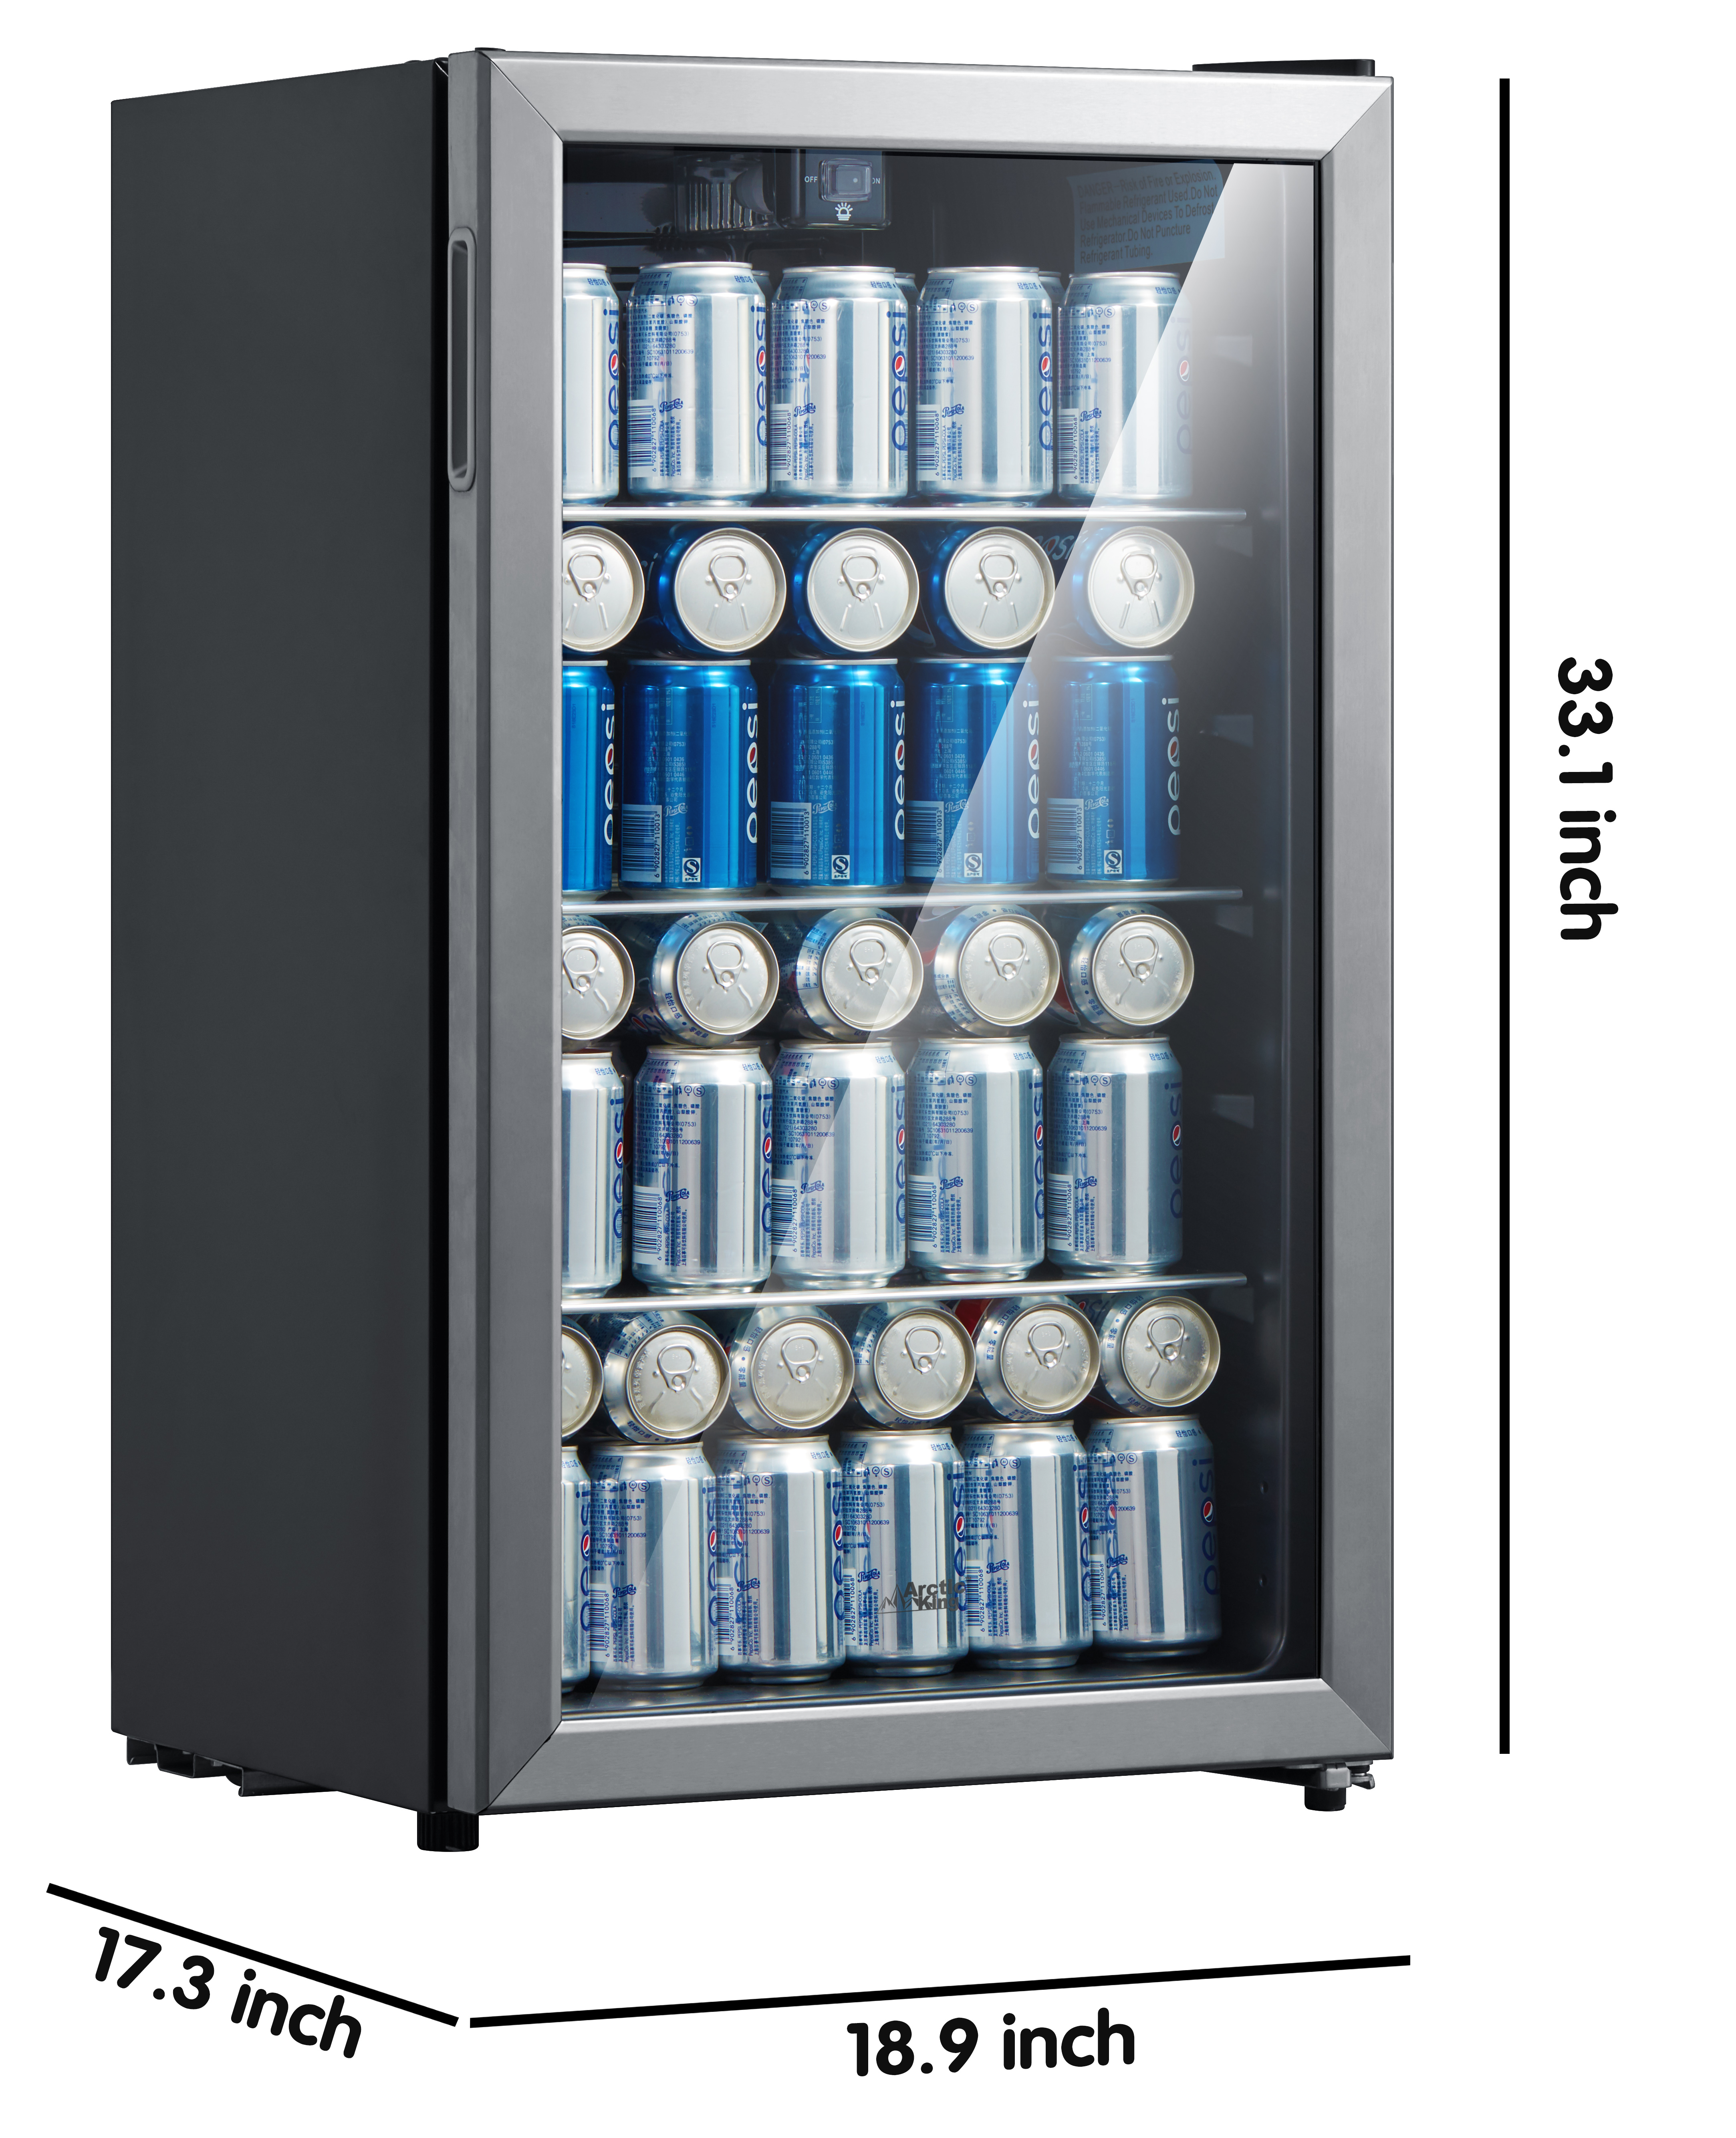 Arctic King 115 Can Beverage Fridge, Stainless Steel look Frame - image 7 of 9